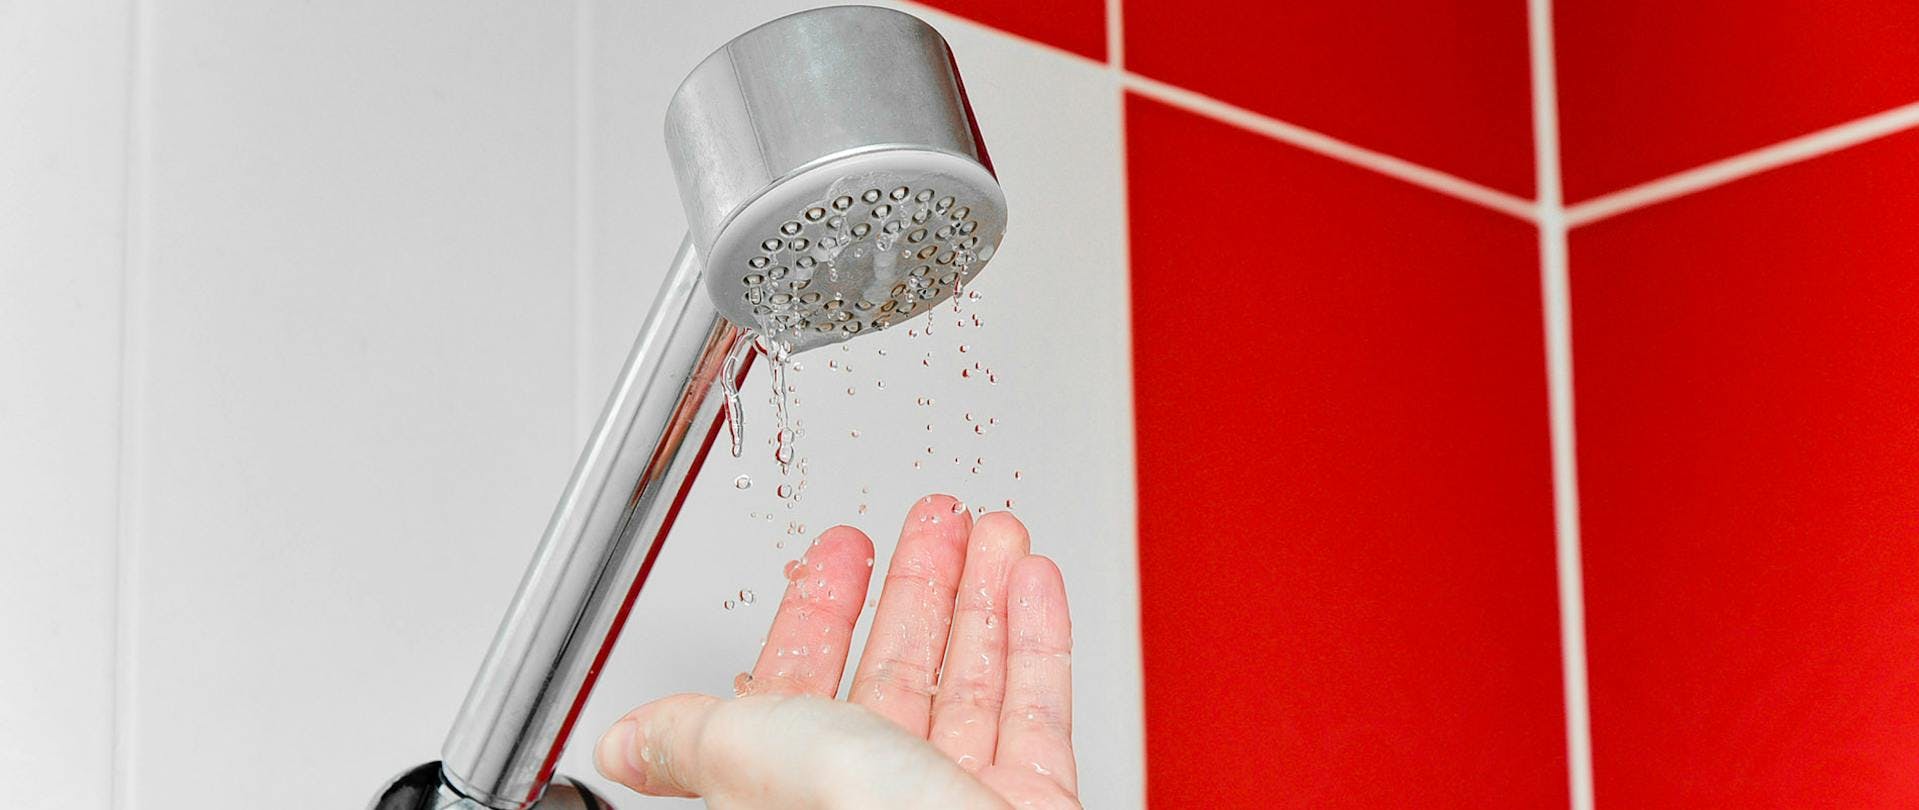 Low Water Pressure Shower Hand Showing Dripping Image